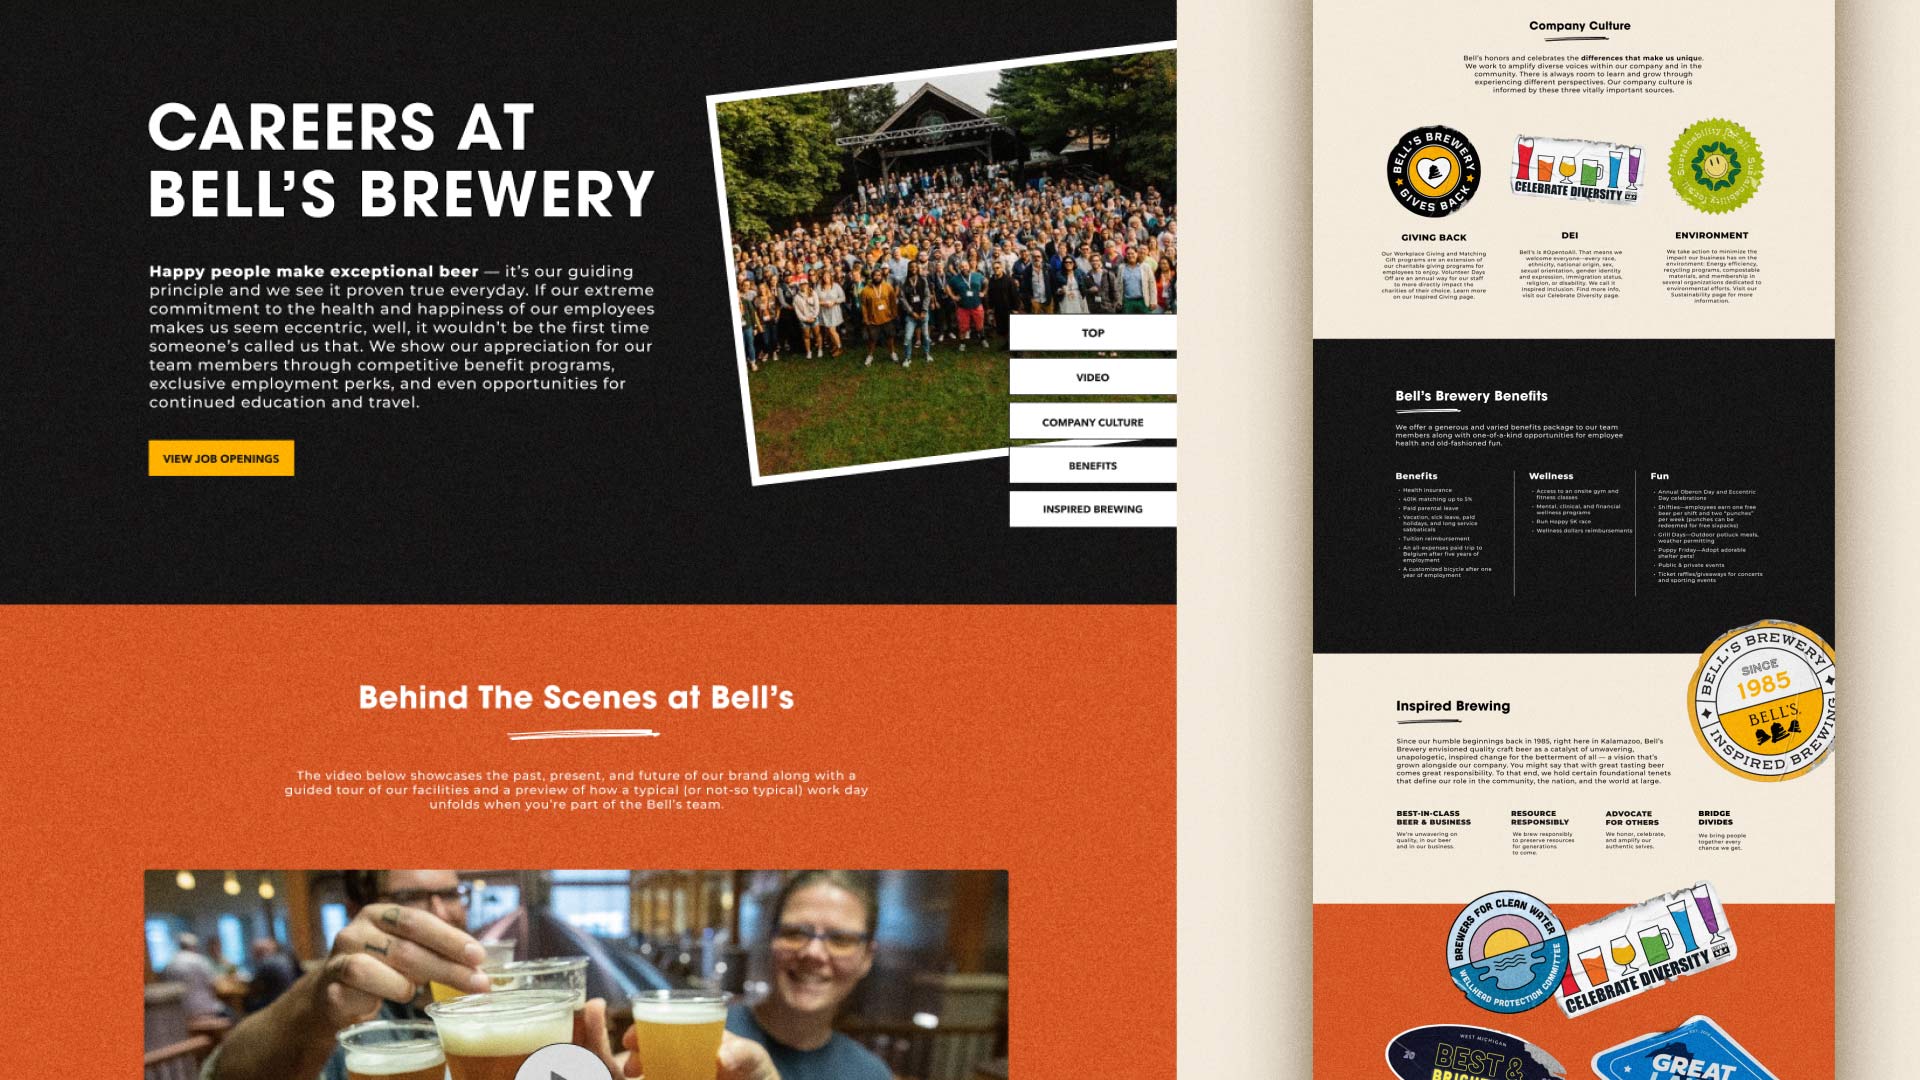 Close up image of the Careers at Bell's Brewery web page